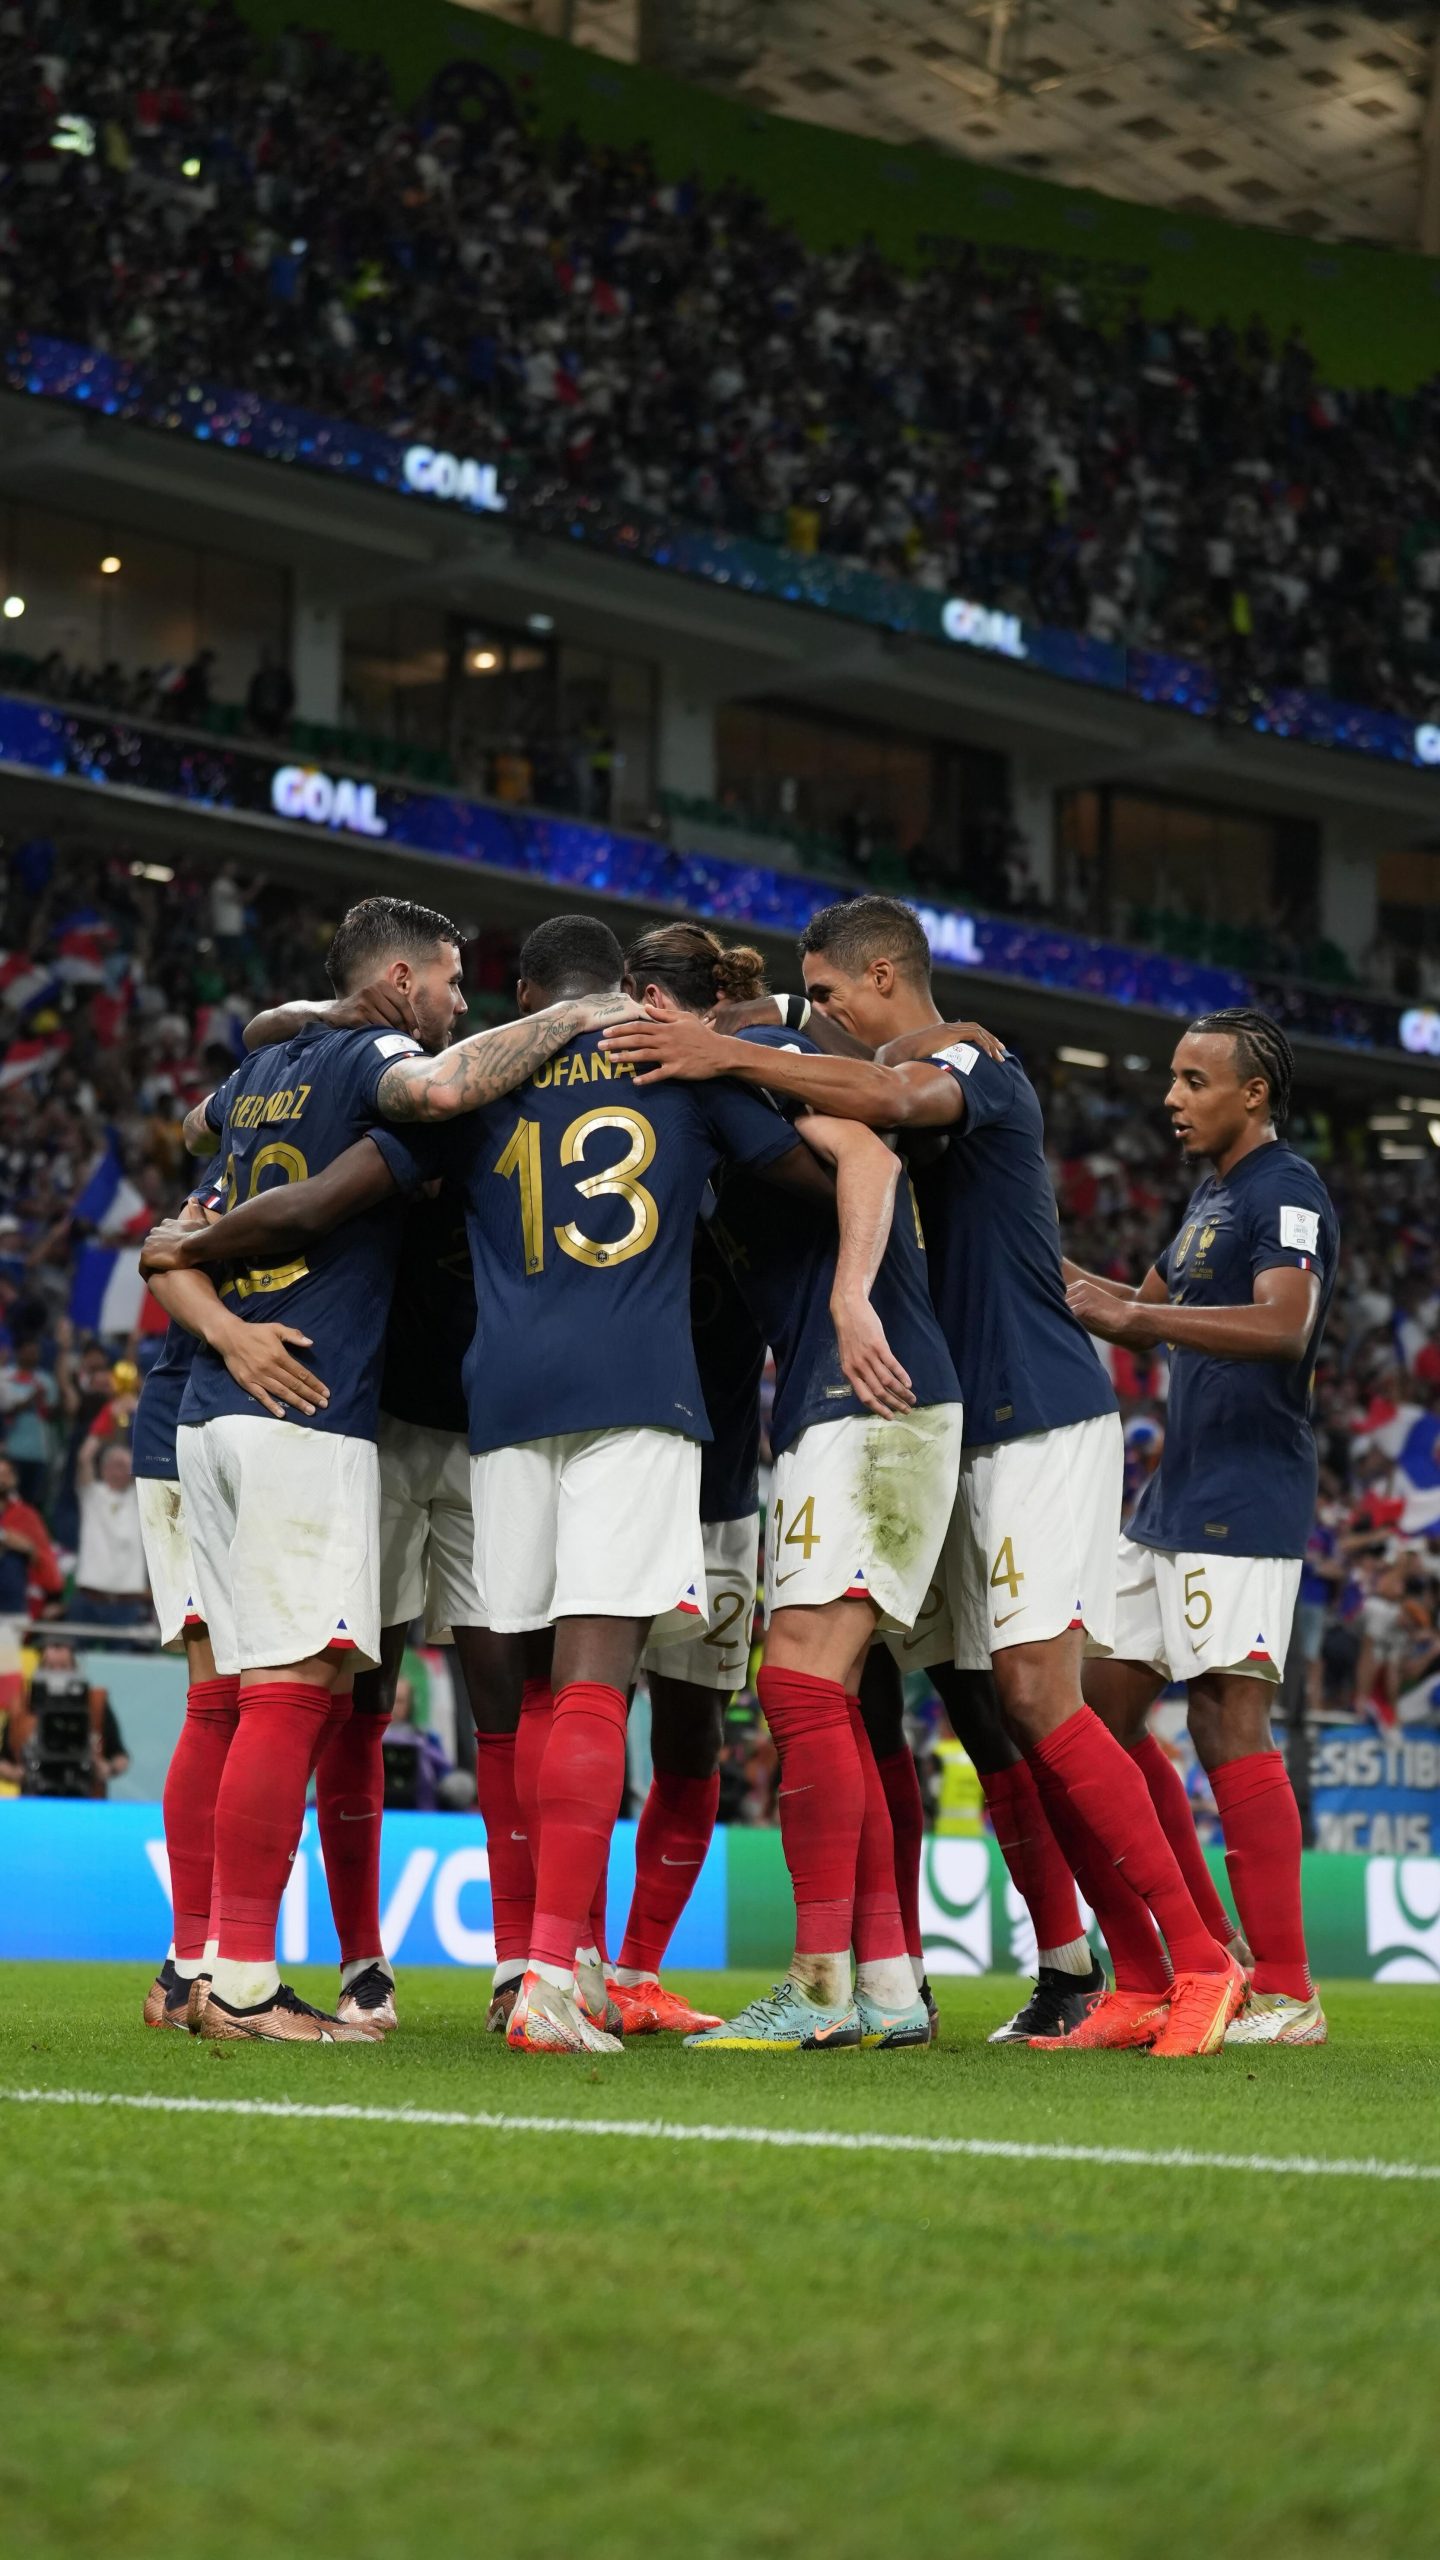 FIFA World Cup 2022 quarterfinal England vs France: 5 things to look out for